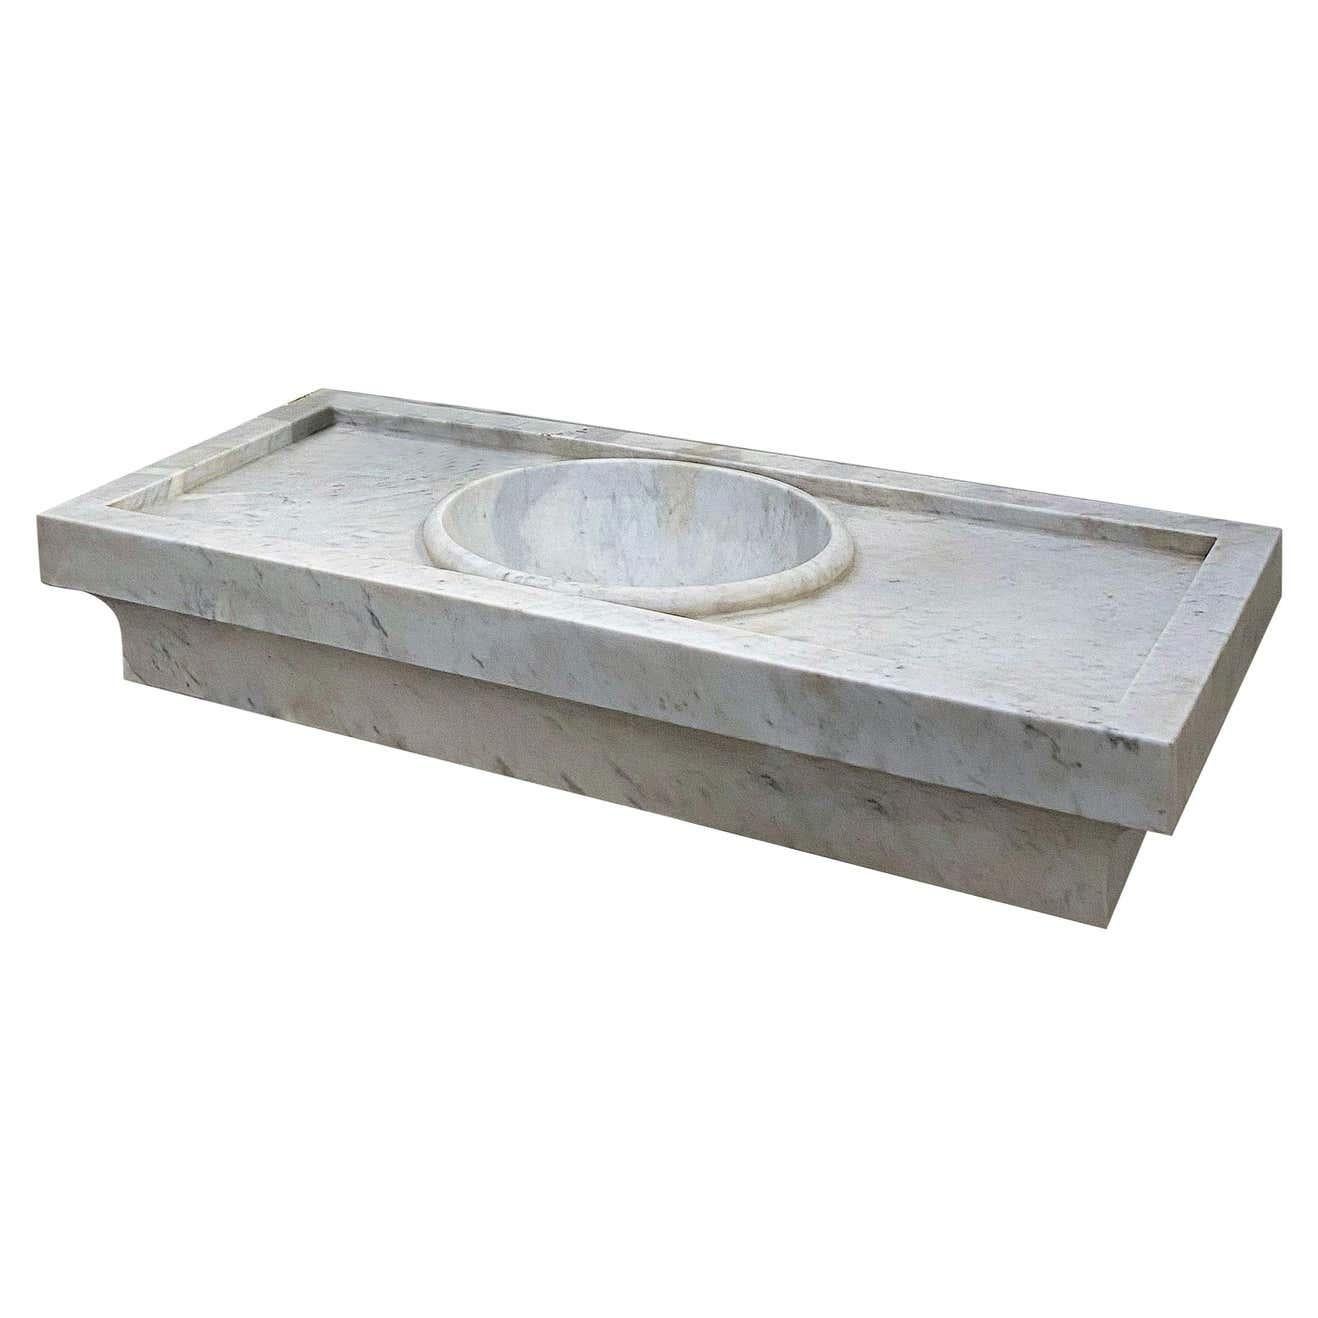 Classical Marble Stone Sink Basin In New Condition For Sale In Cranbrook, Kent